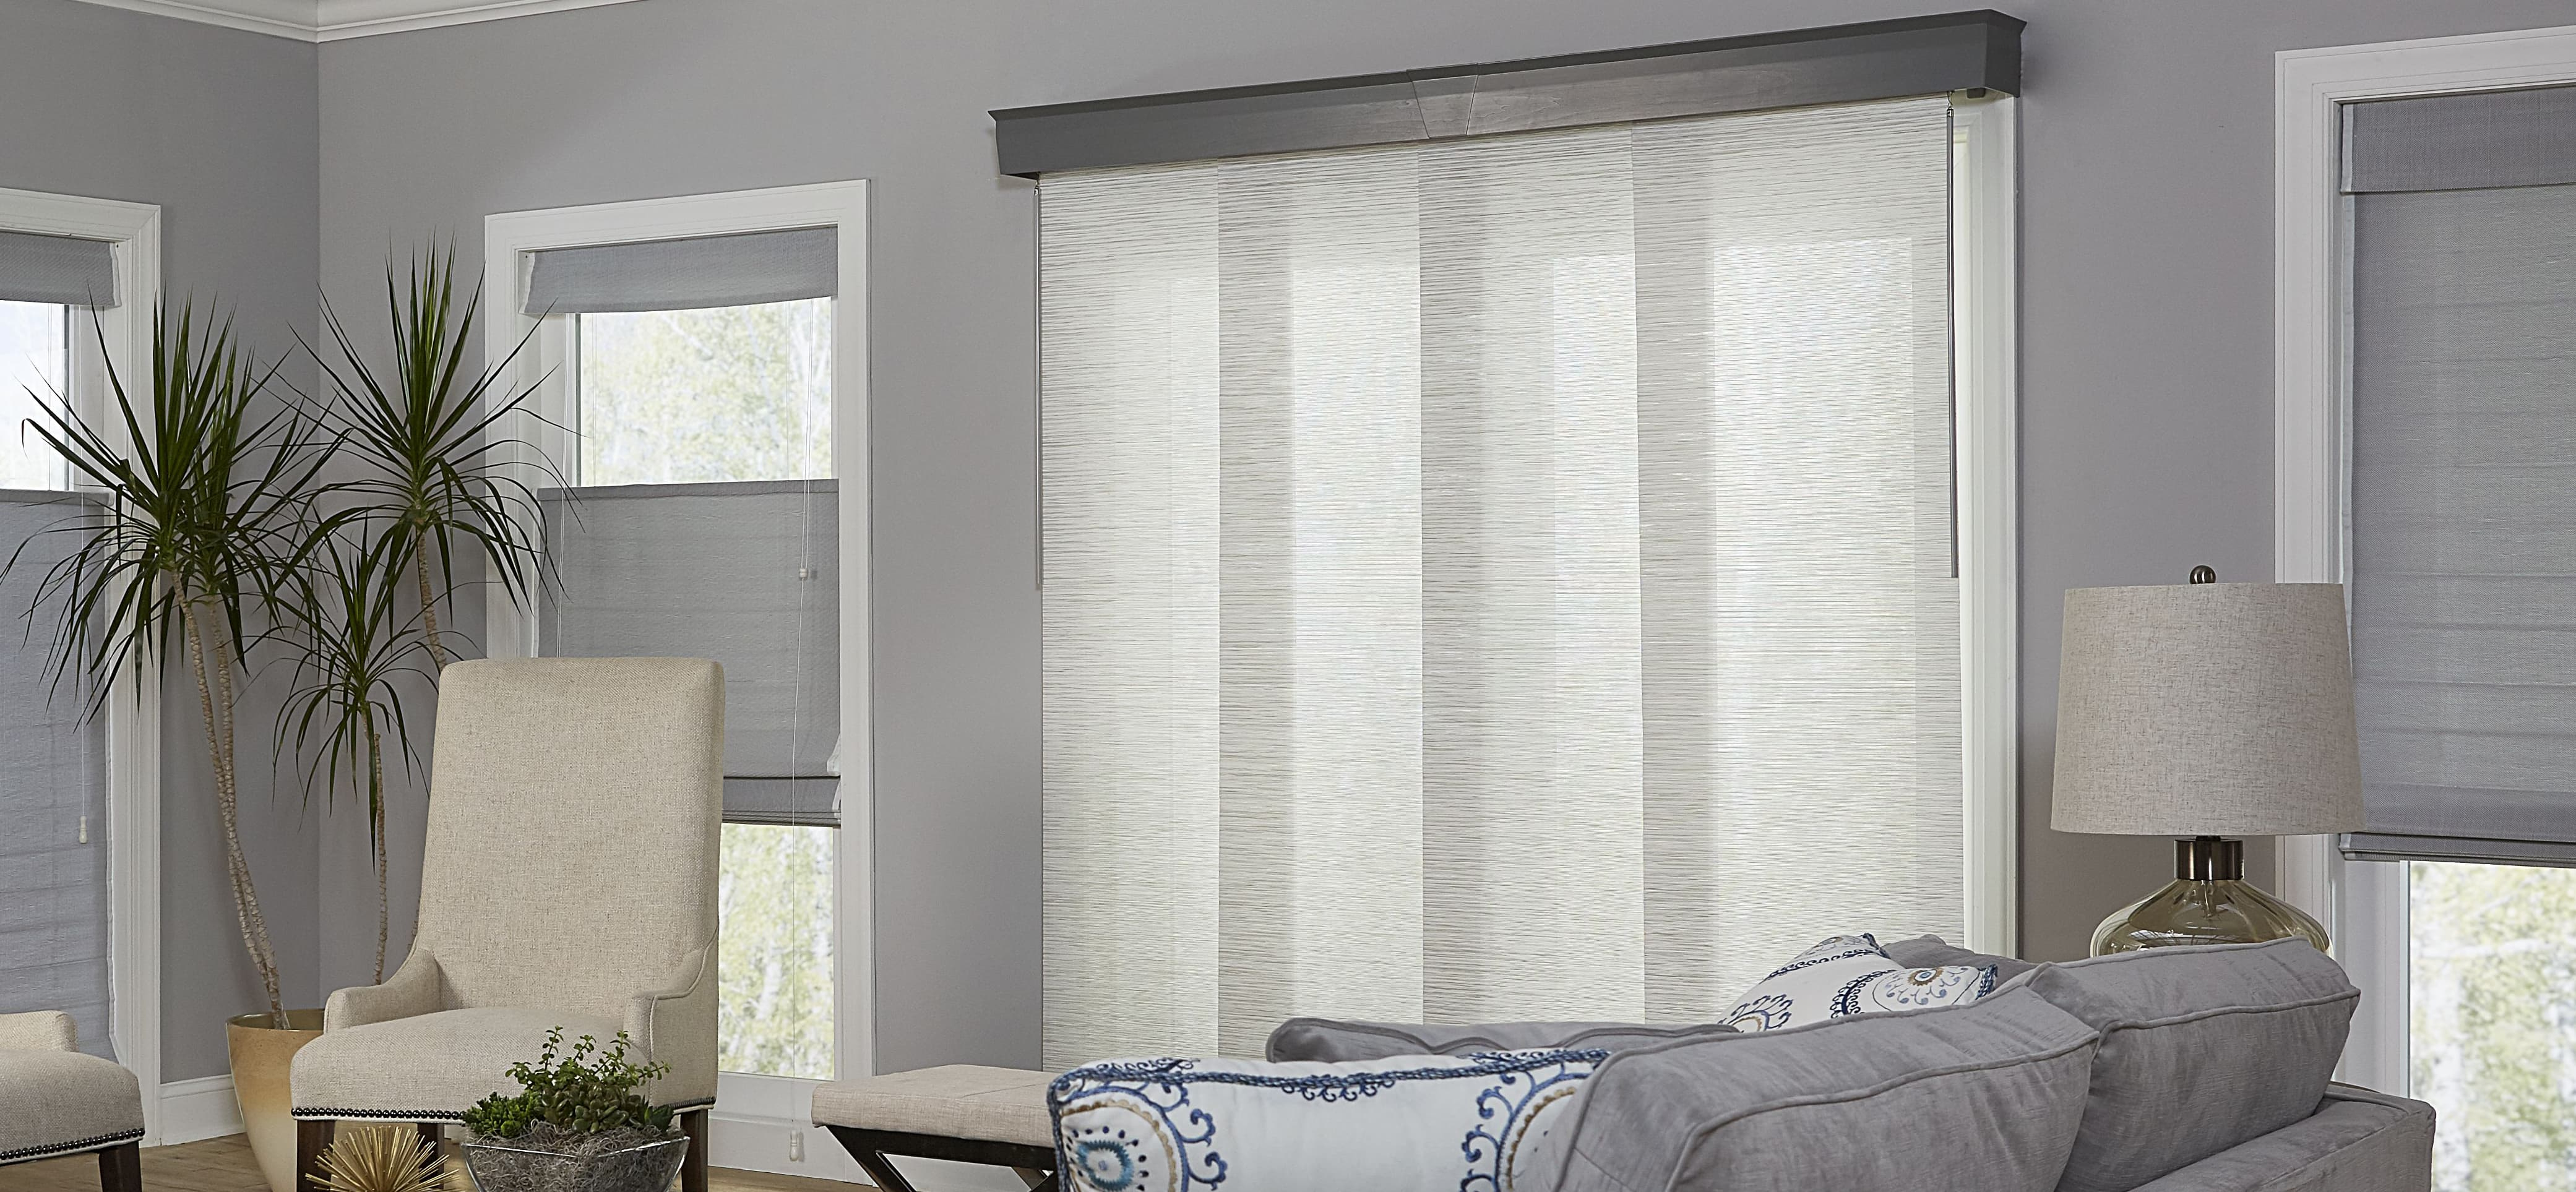 Blinds For Sliding Glass Doors Alternatives To Vertical in dimensions 4163 X 1927